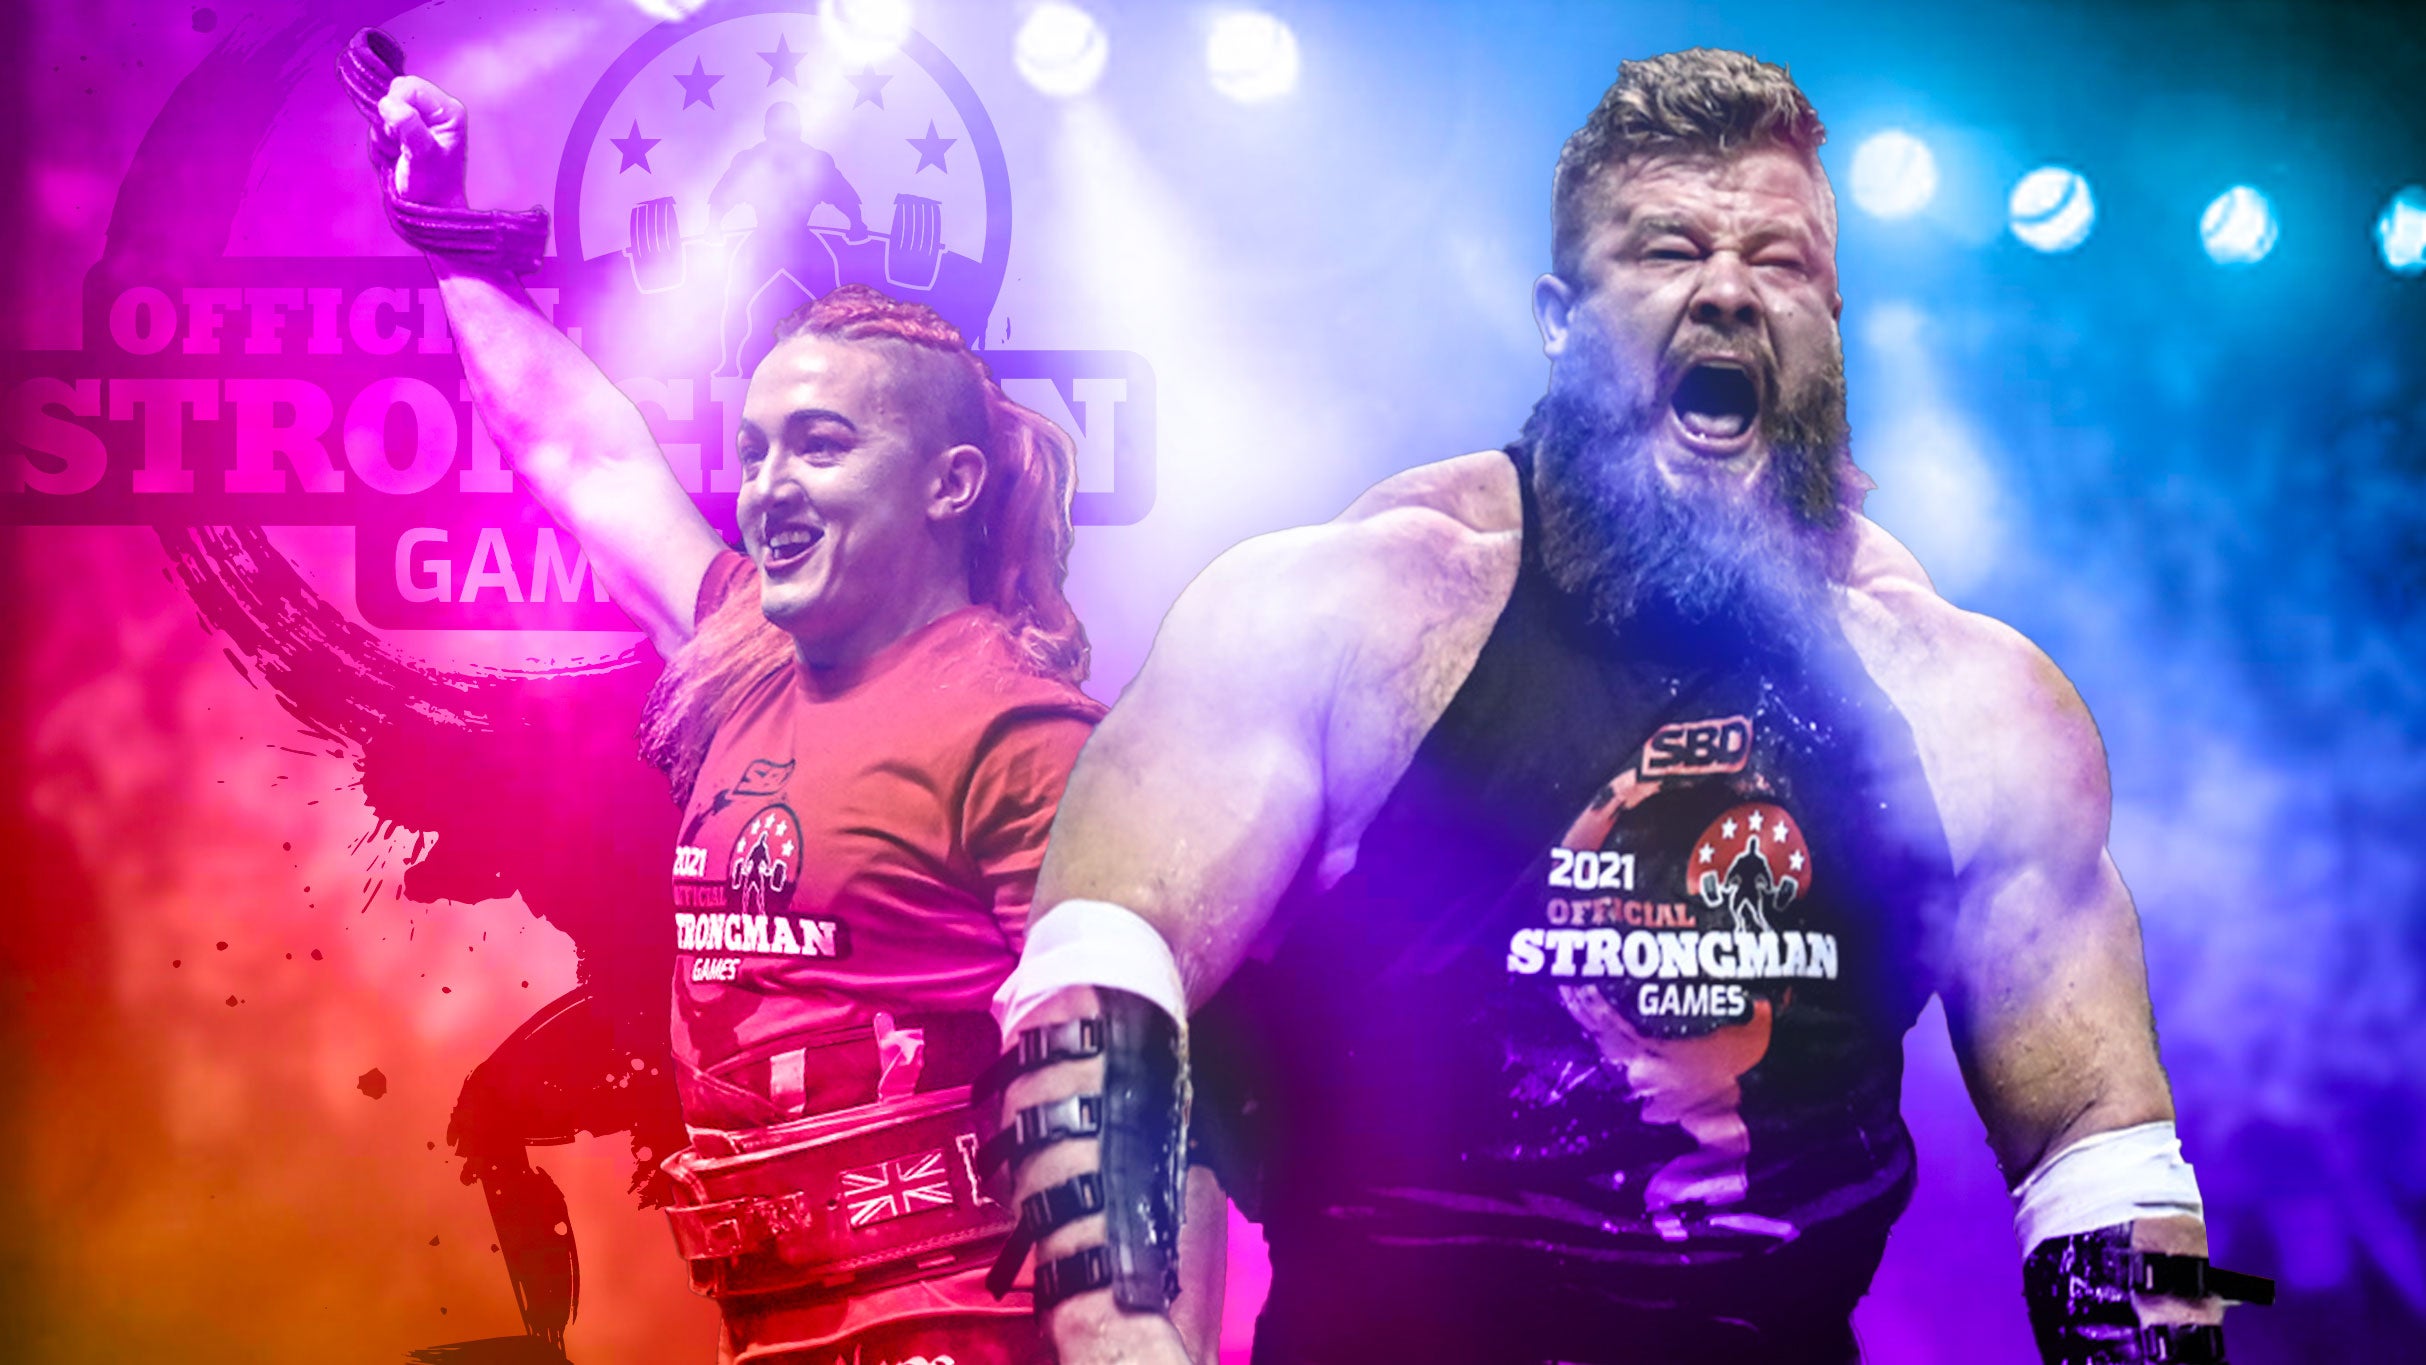 Official Strongman Games: 3 Day Pass at Charleston Coliseum